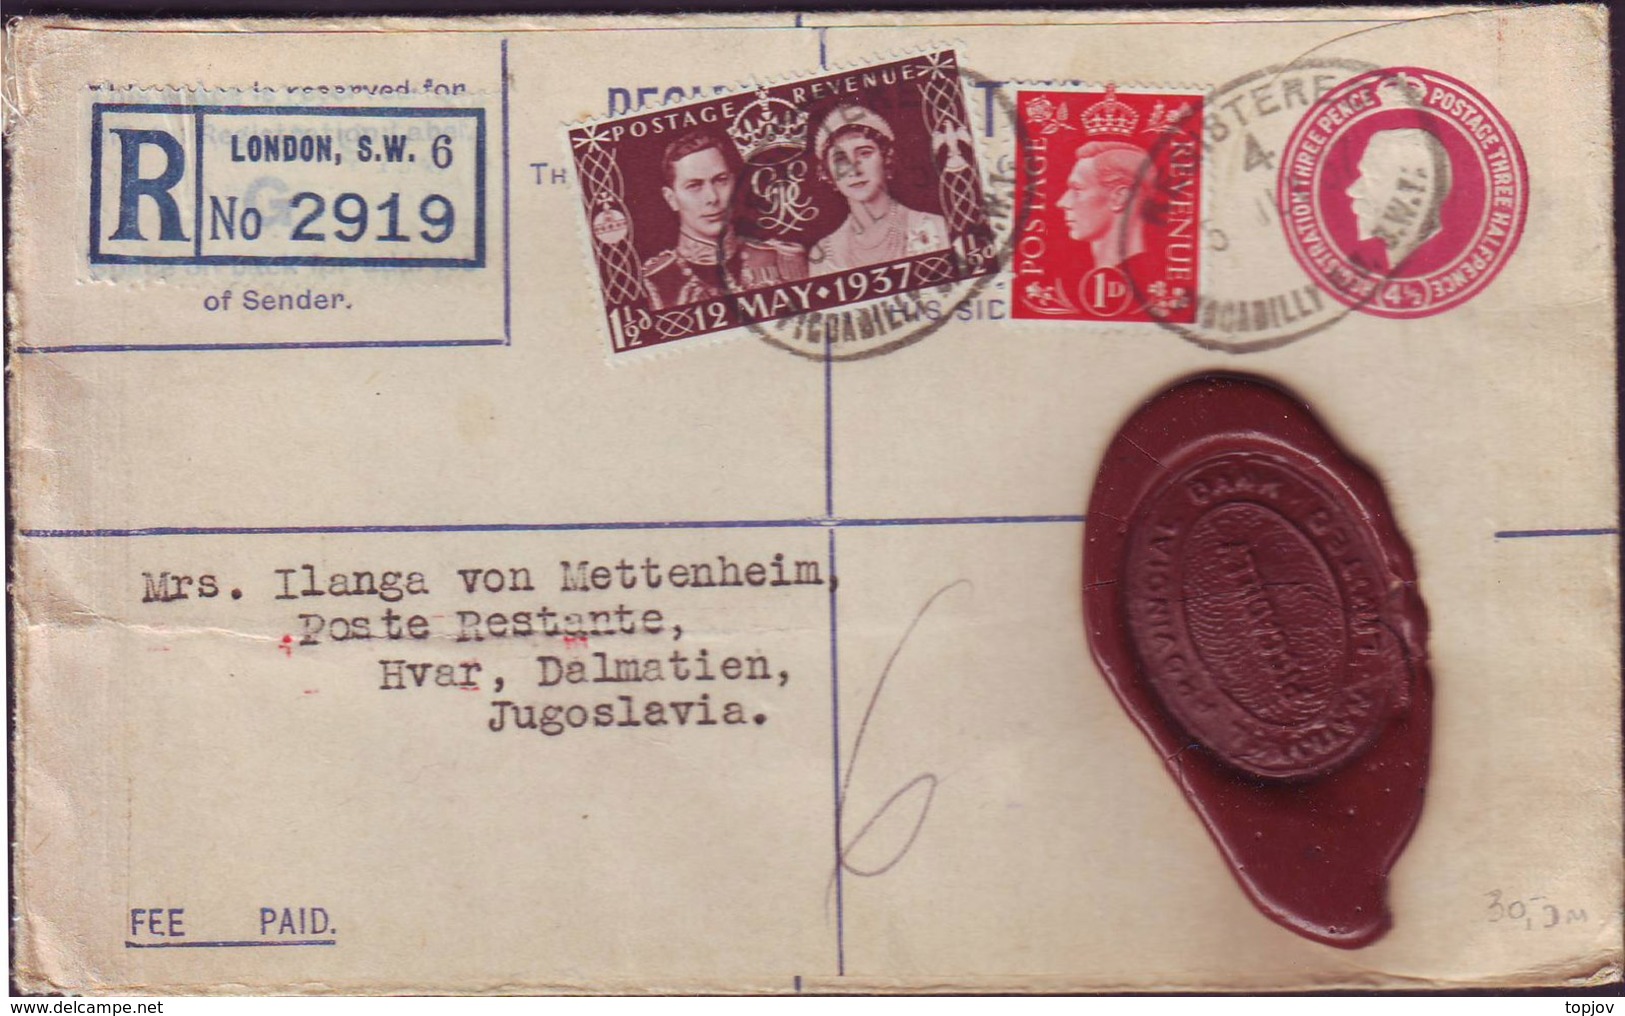 GB - REGISTRATION Cover 4,5 Pence + 1 P + 1,5 P CORONATION - From Bank On Piccadilly London To HVAR - 1937 - Covers & Documents